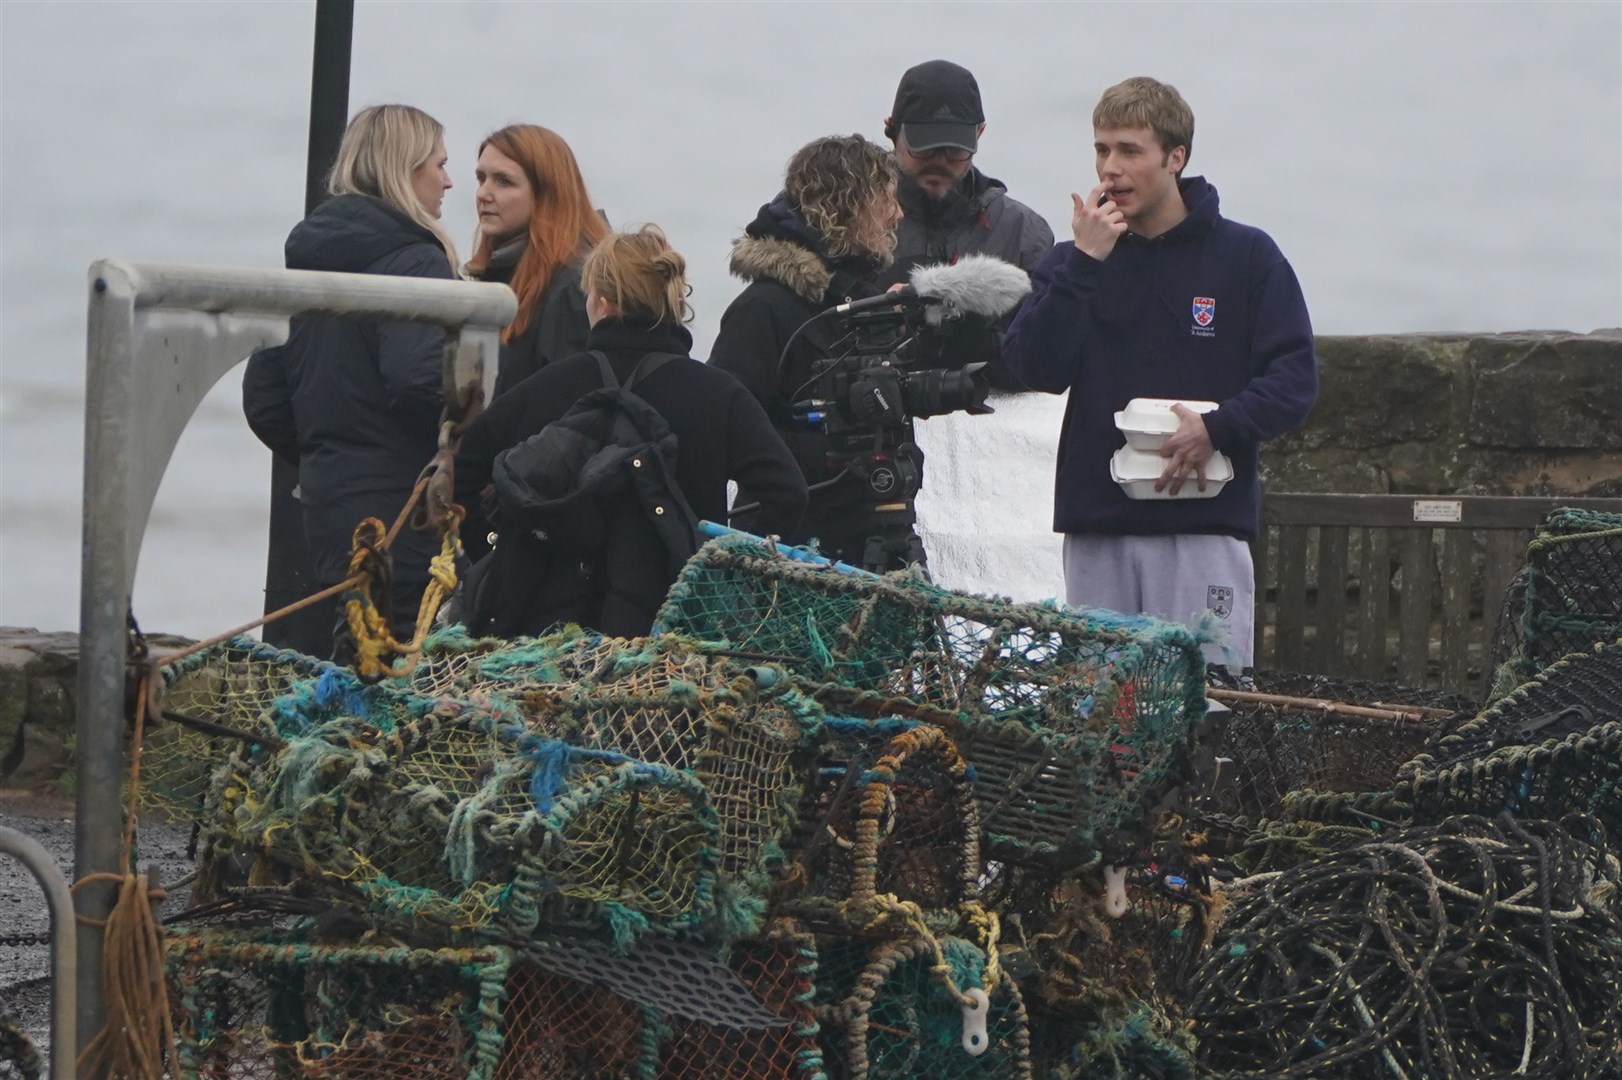 McVey joined the crew for lunch during a pause in filming (Andrew Milligan/PA)